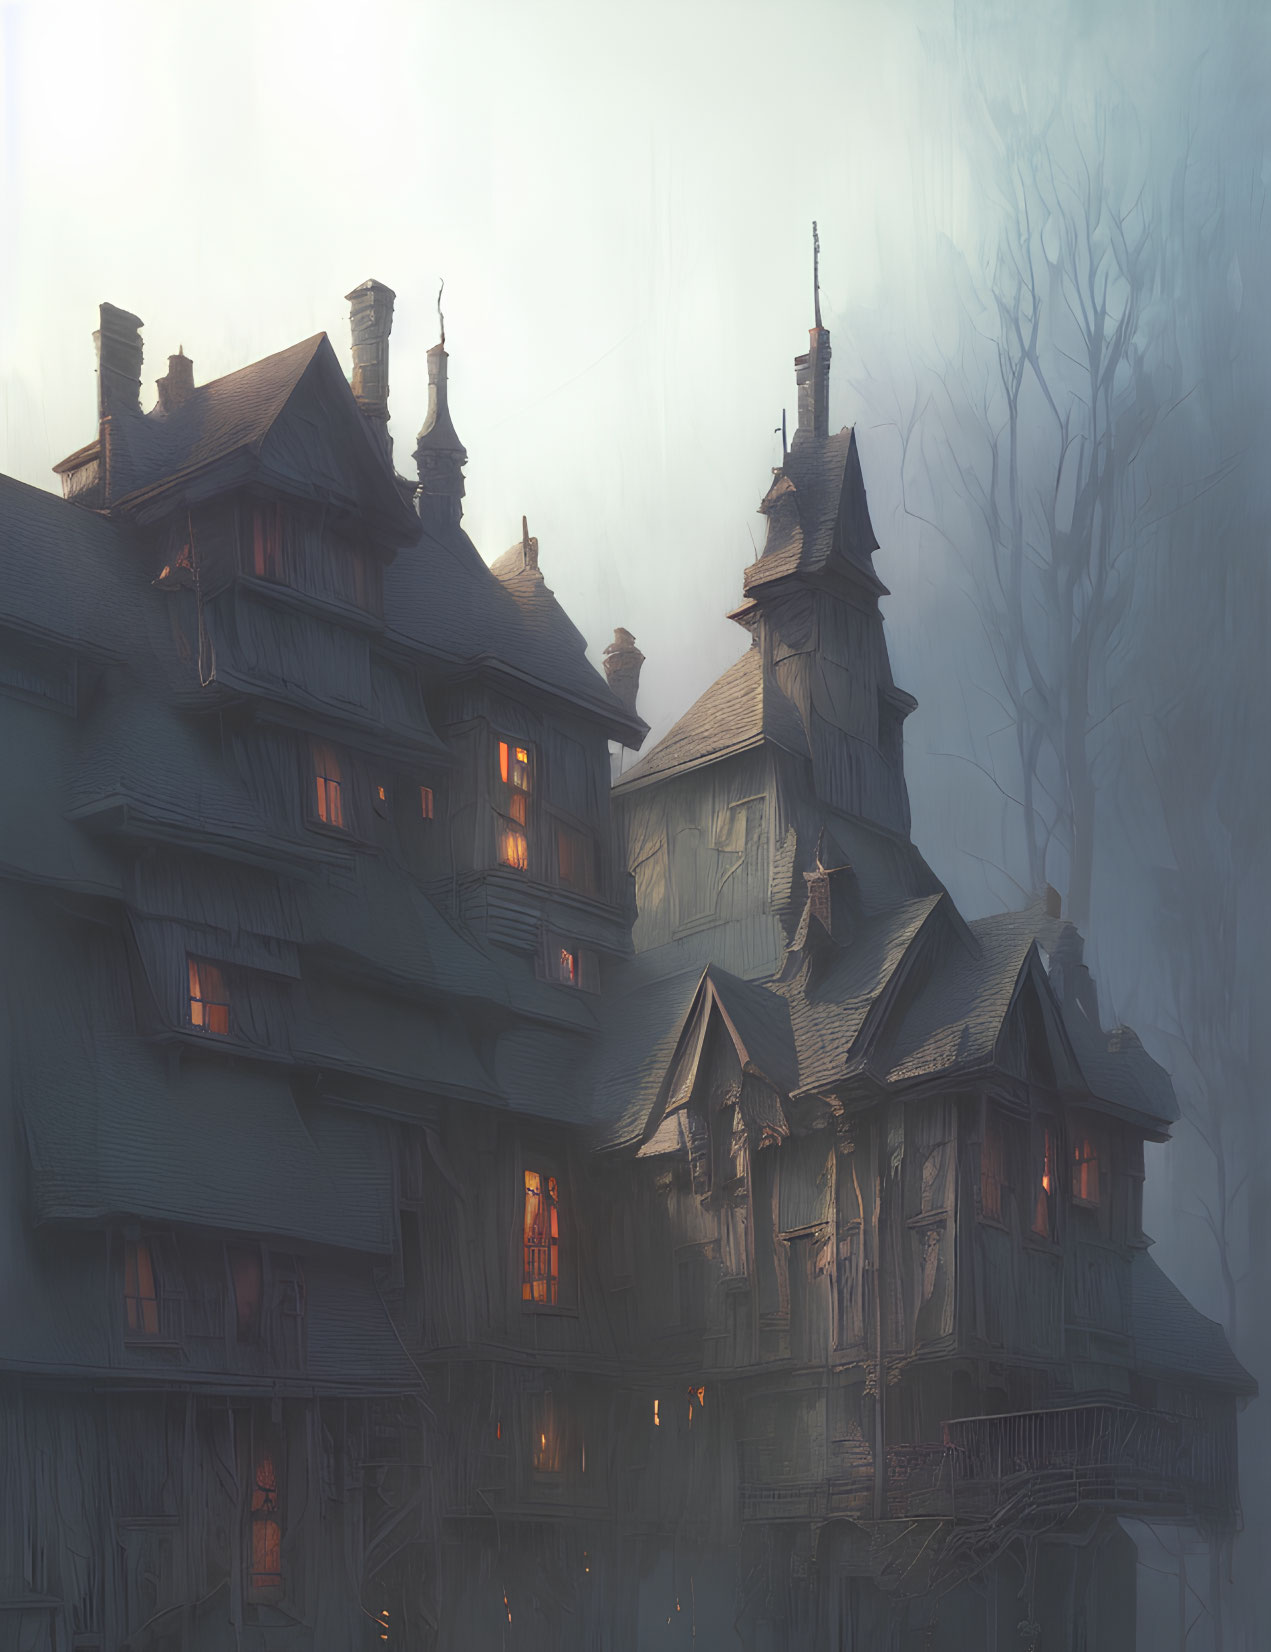 Eerie Victorian mansion in mist with glowing windows & bare trees